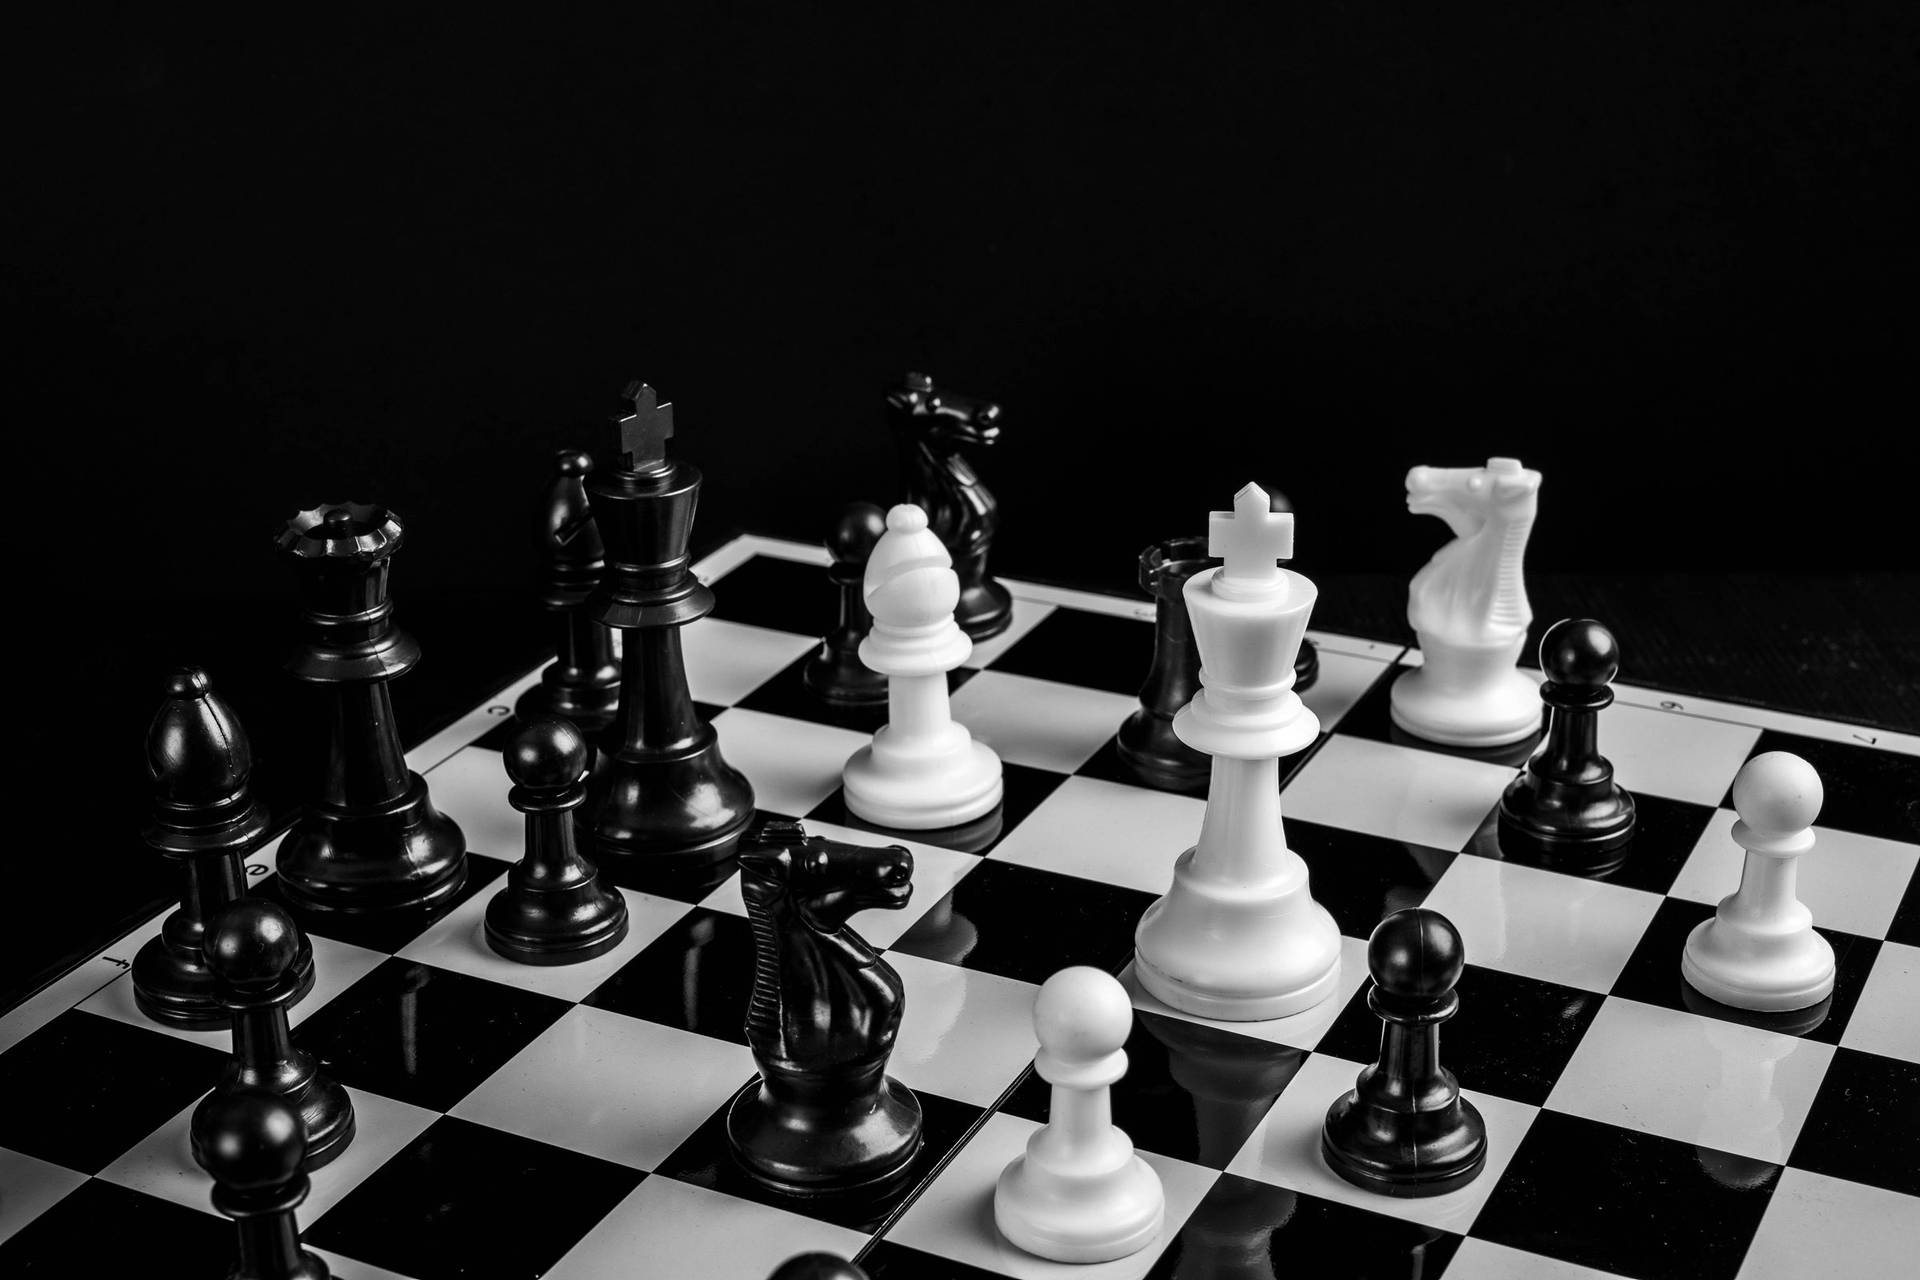 Caption: Engaging Mind Games: Black And White Plastic Chess Pieces On The Board